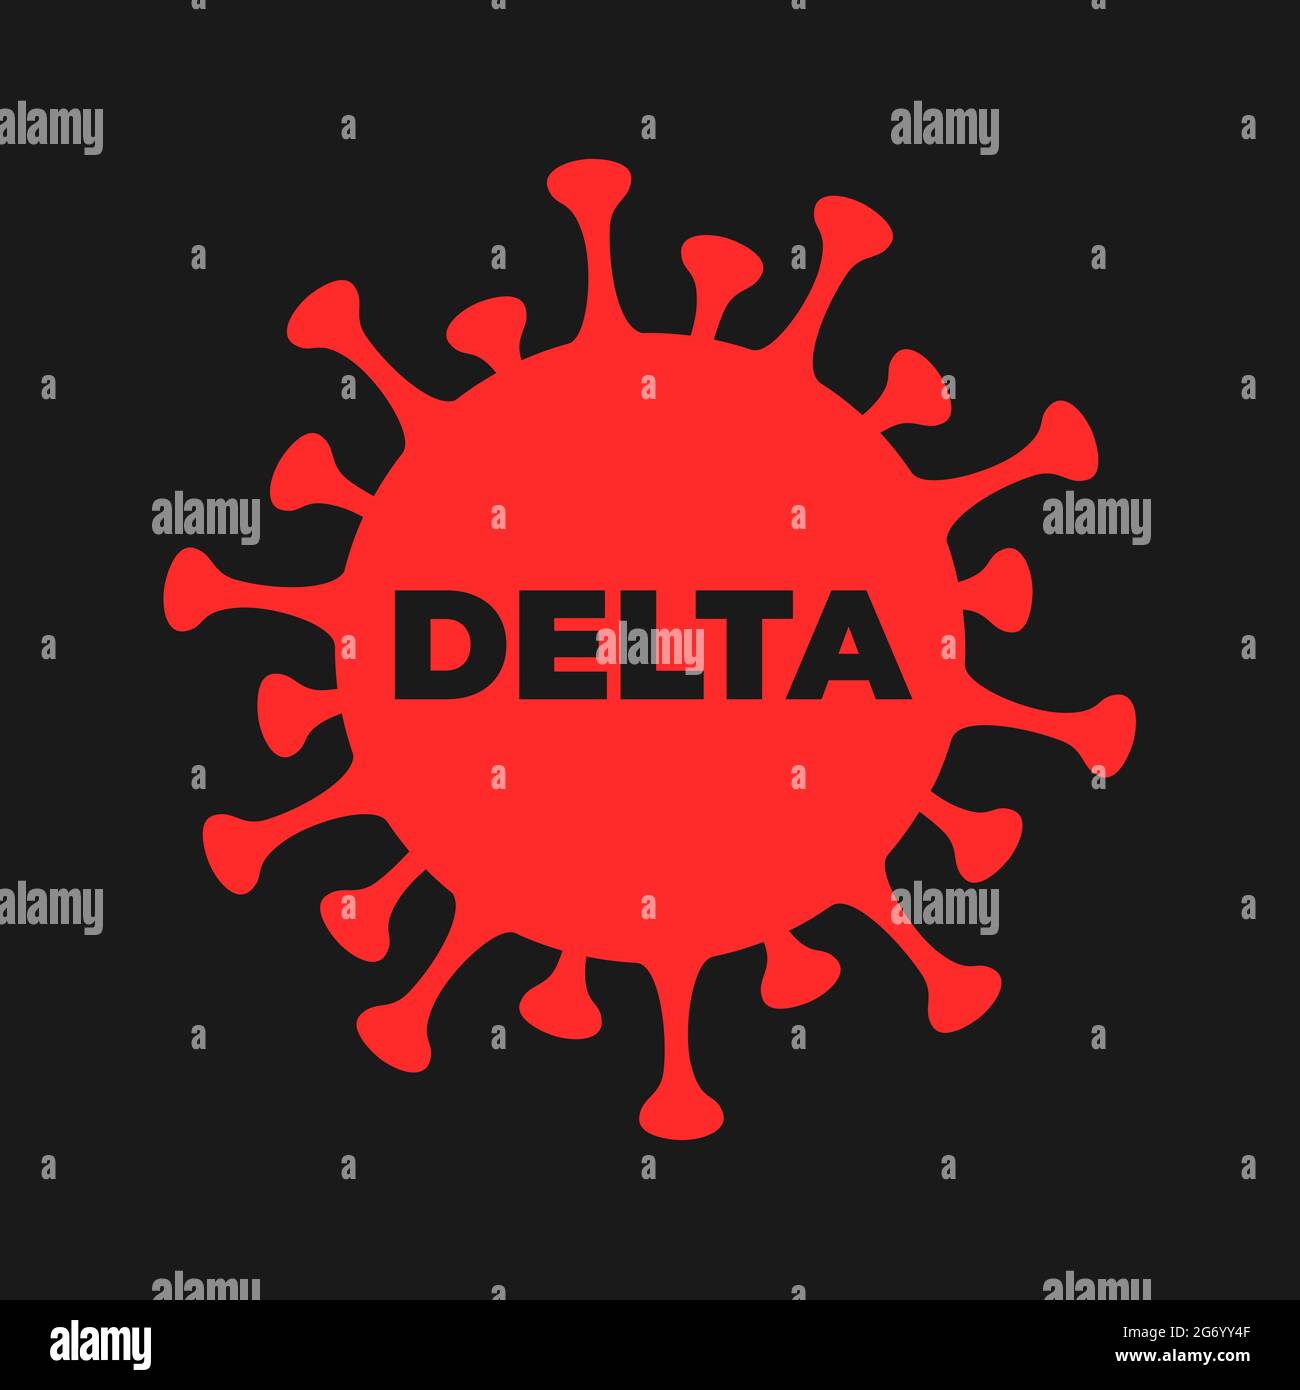 Delta variant and mutation of Covid-19 and coronavirus. Virus and viral infection with text. Vector illustration isolated on black. Stock Photo